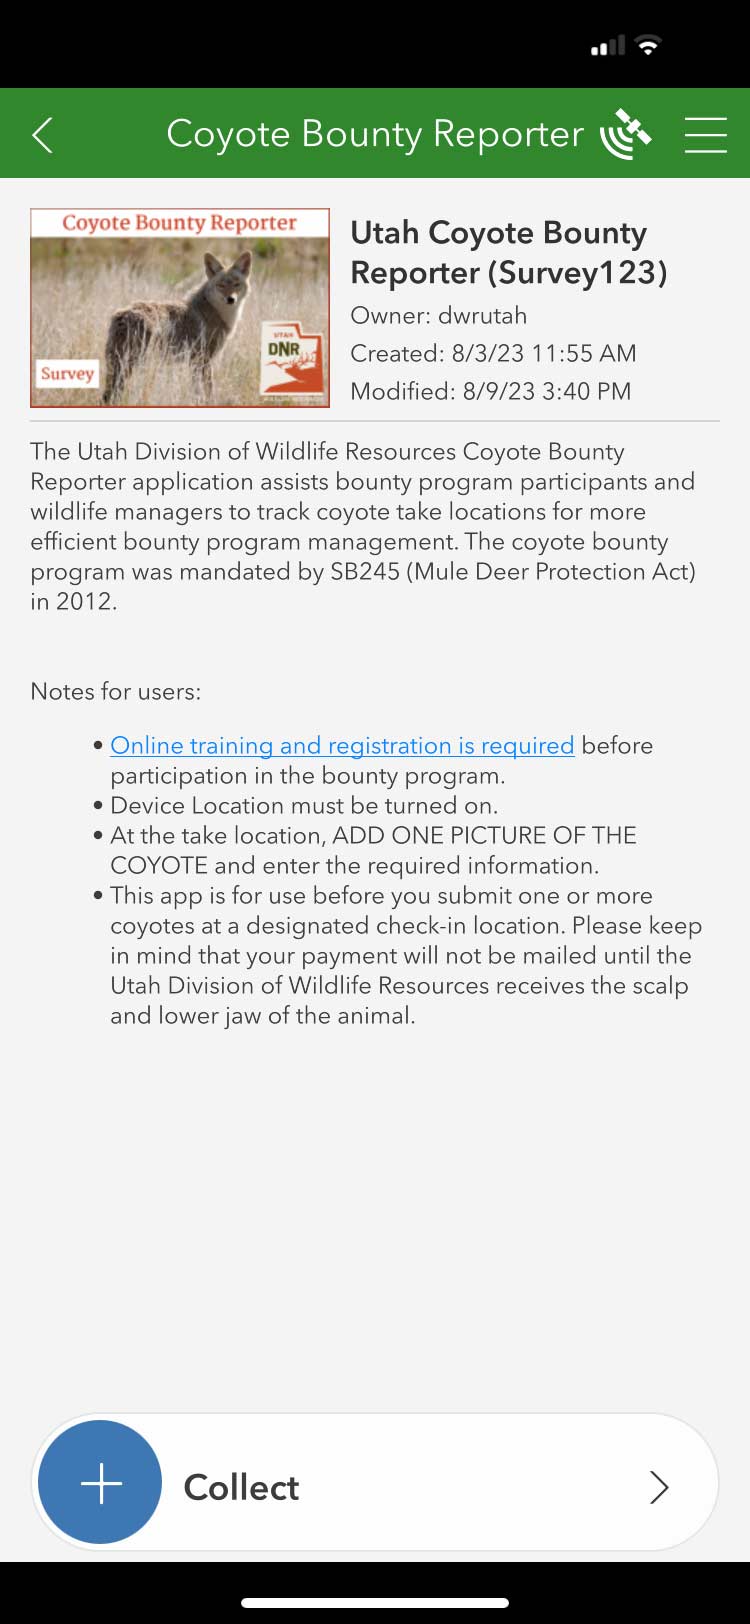 iOS screen shot of the Utah Coyote Bounty Reporter survey, collect information